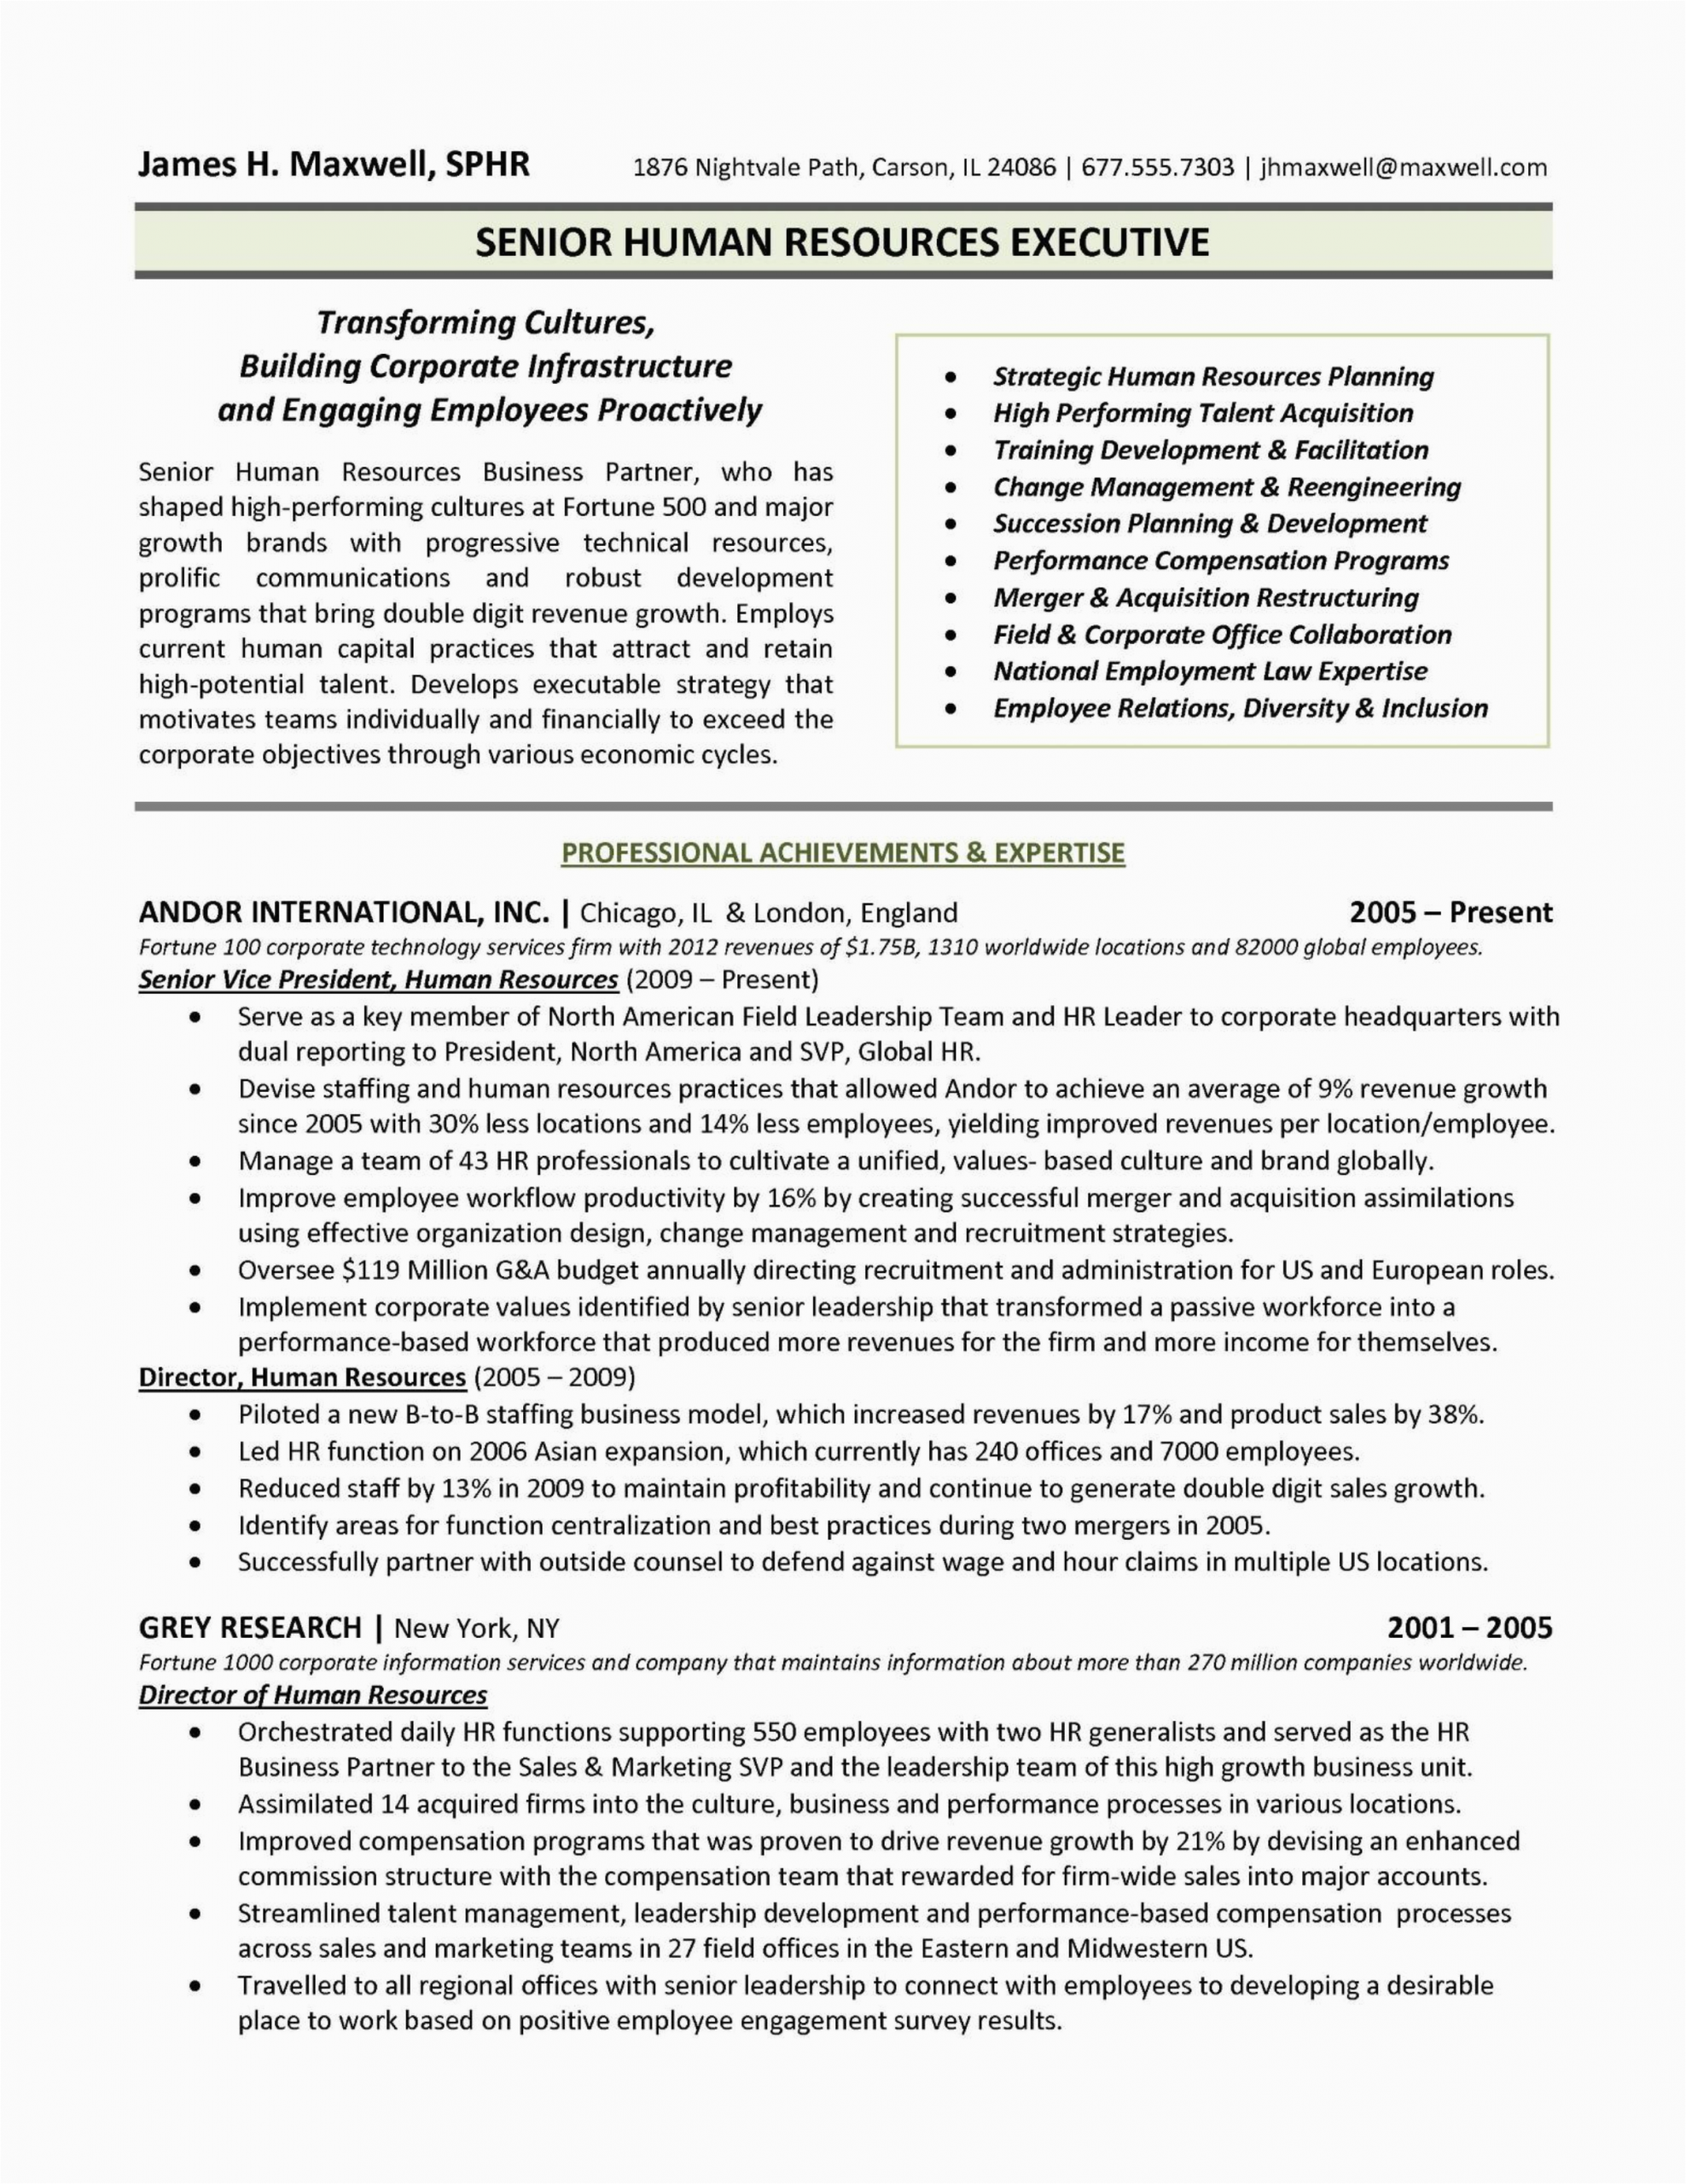 Resume Headline Samples for Human Resources Human Resources Executive Resume Sample Free Download